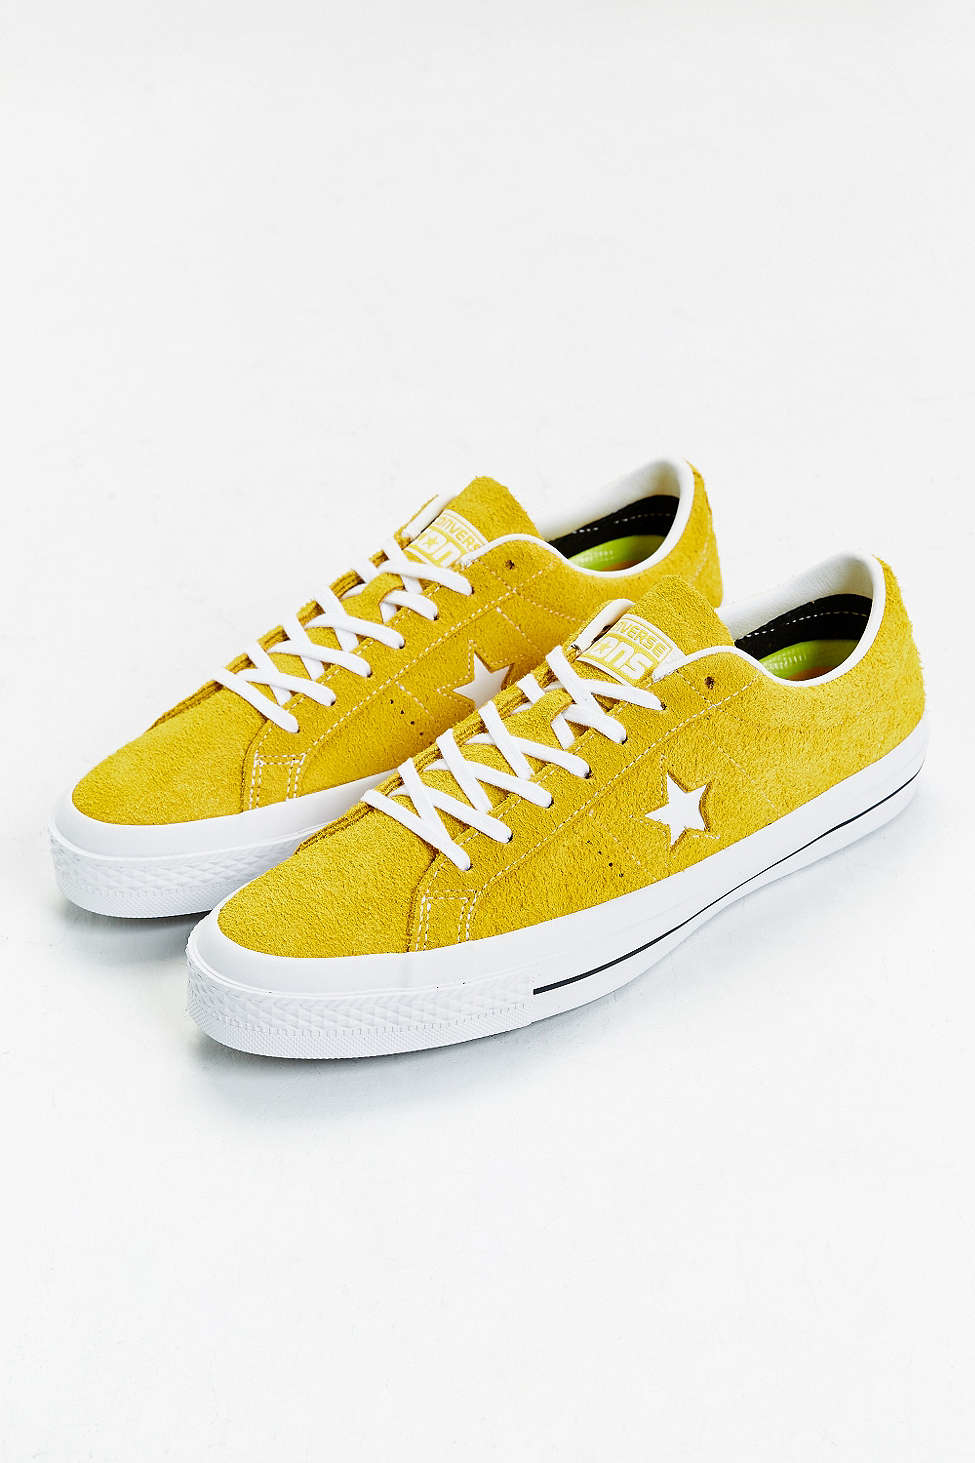 Converse Suede Cons One Star Pro Sneaker in Yellow for Men - Lyst